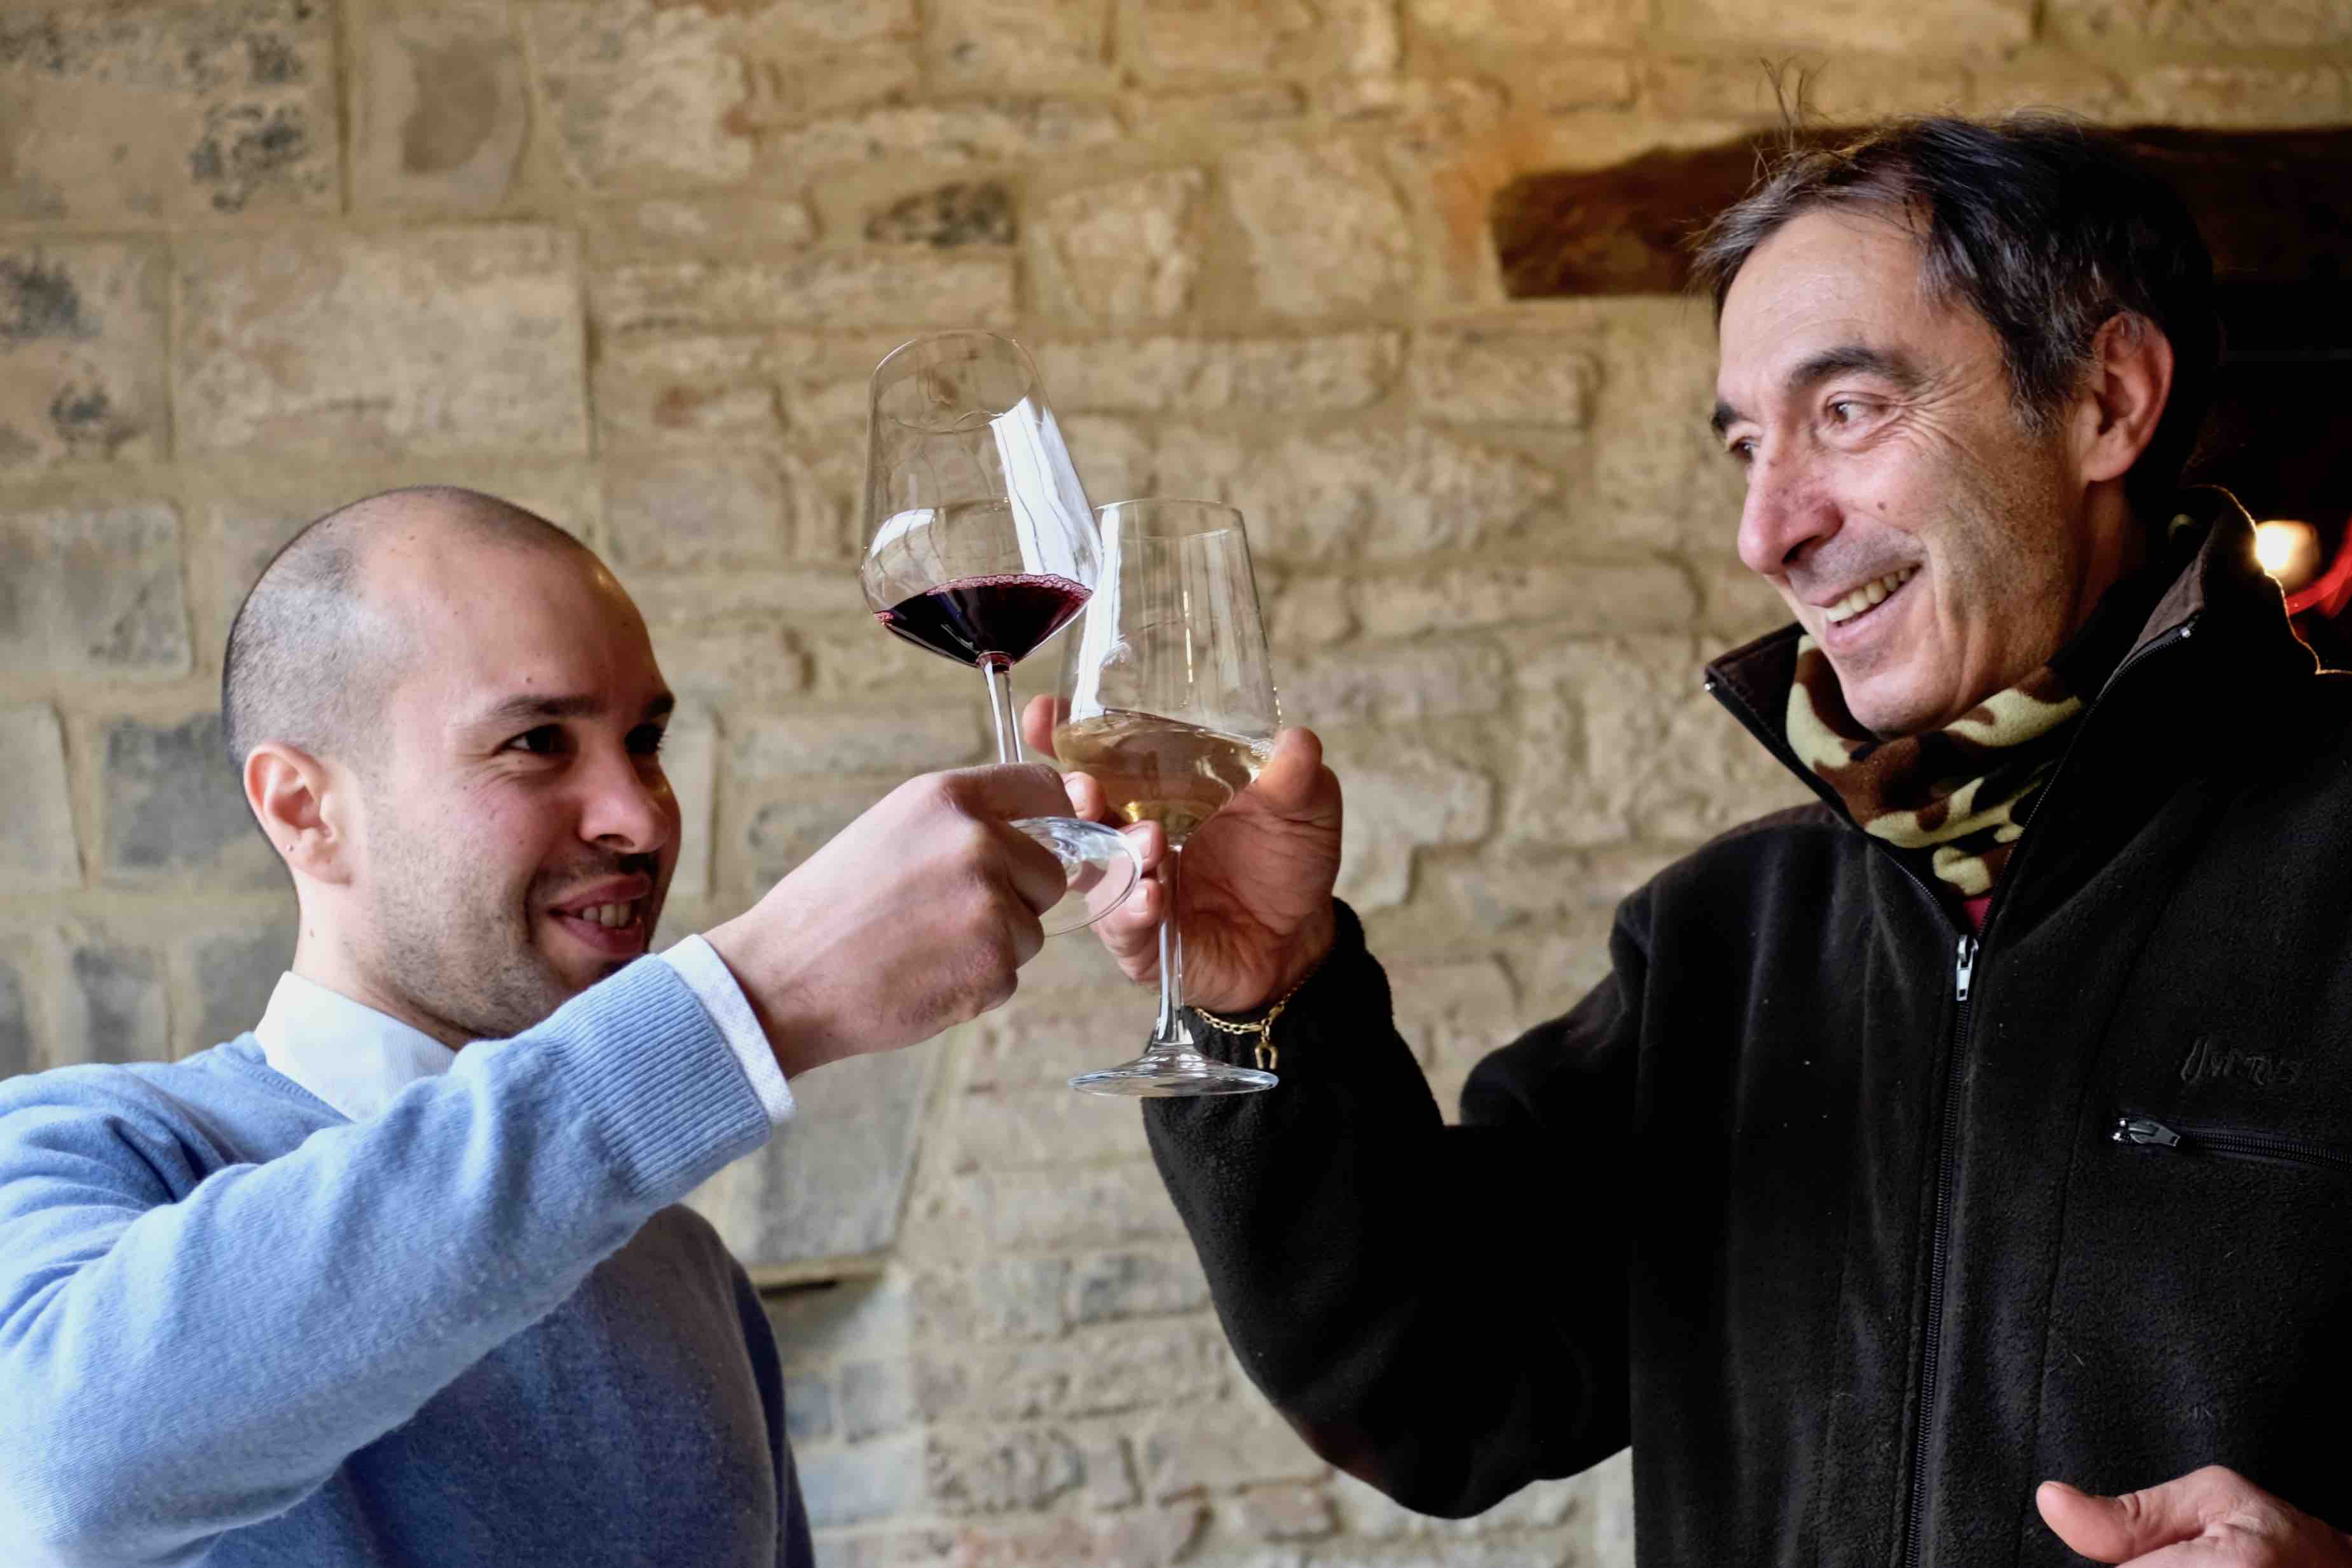 Chiesa del Carmine and Umbria’s special style of wine tourism